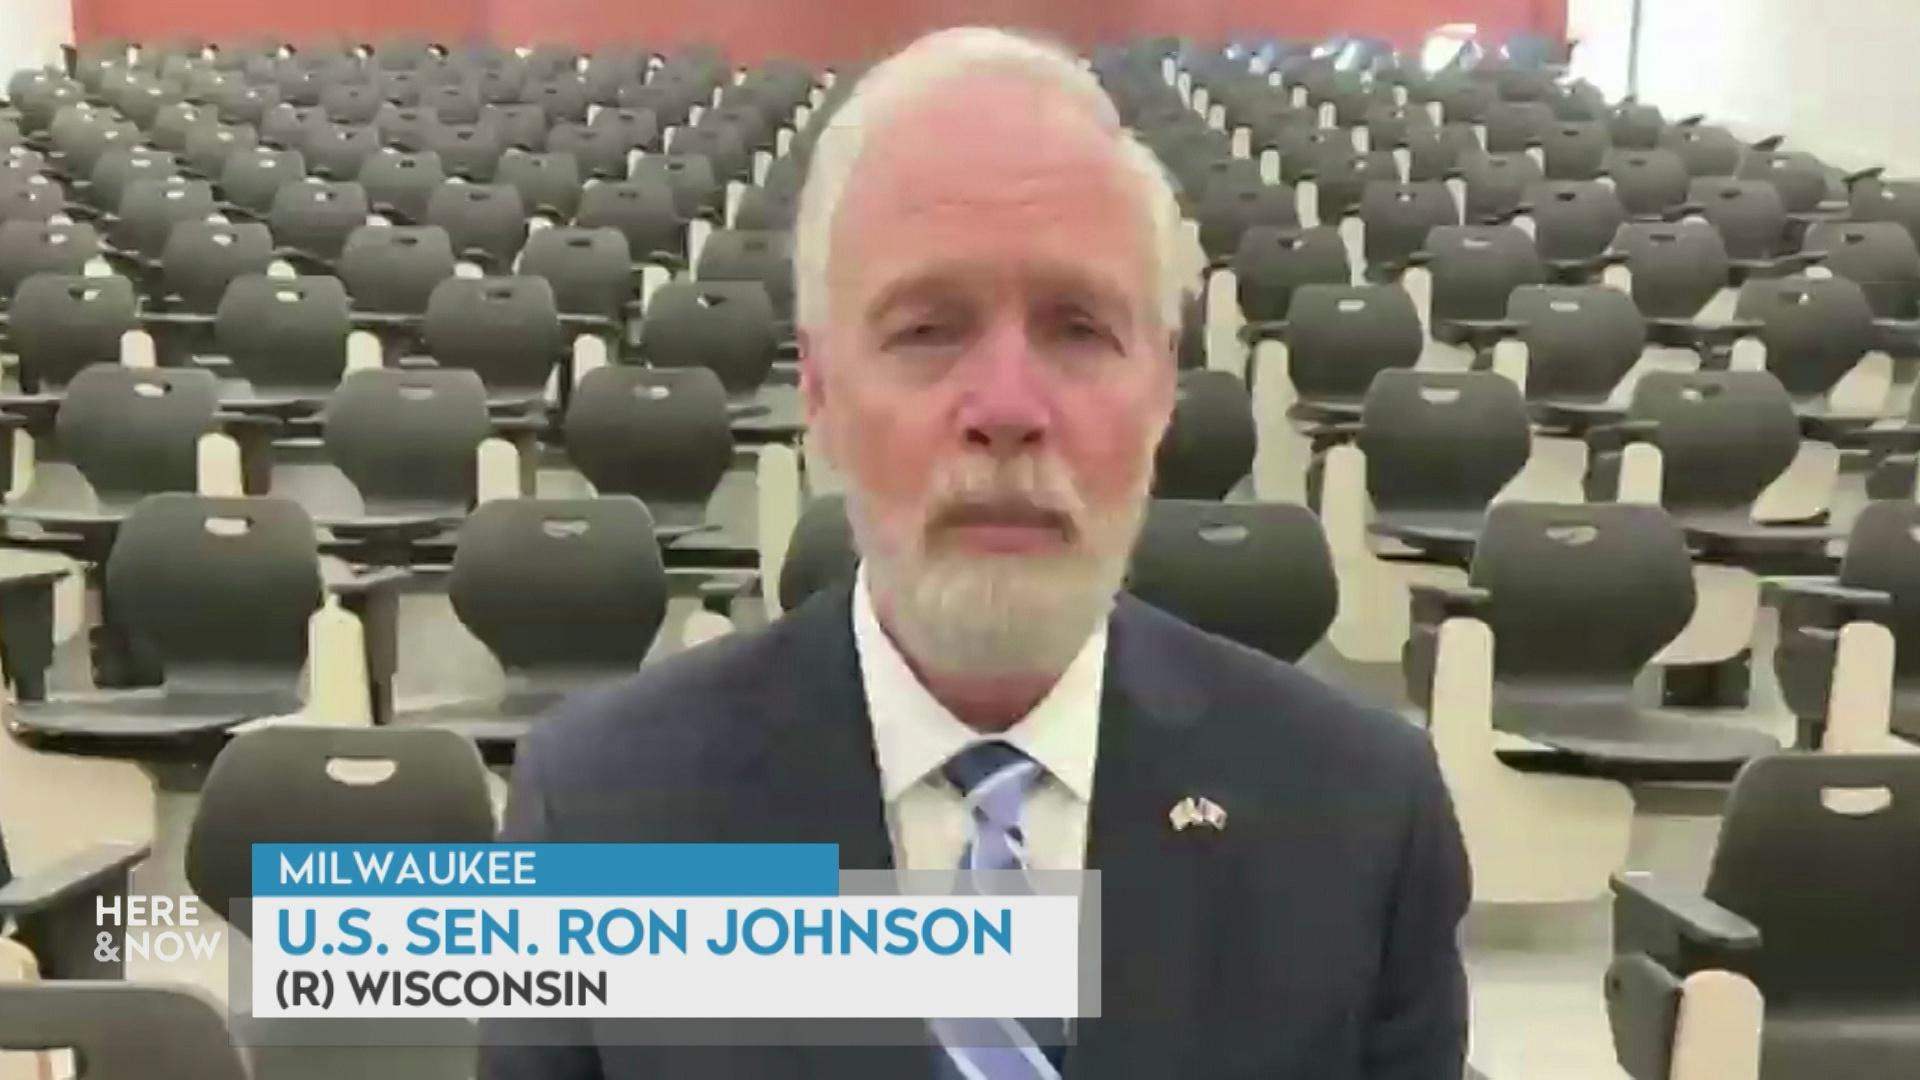 A still image shows Ron Johnson seated behind rows of empty seats in a large hall with a graphic at bottom reading 'Milwaukee,' 'Ron Johnson' and '(R) Wisconsin.'